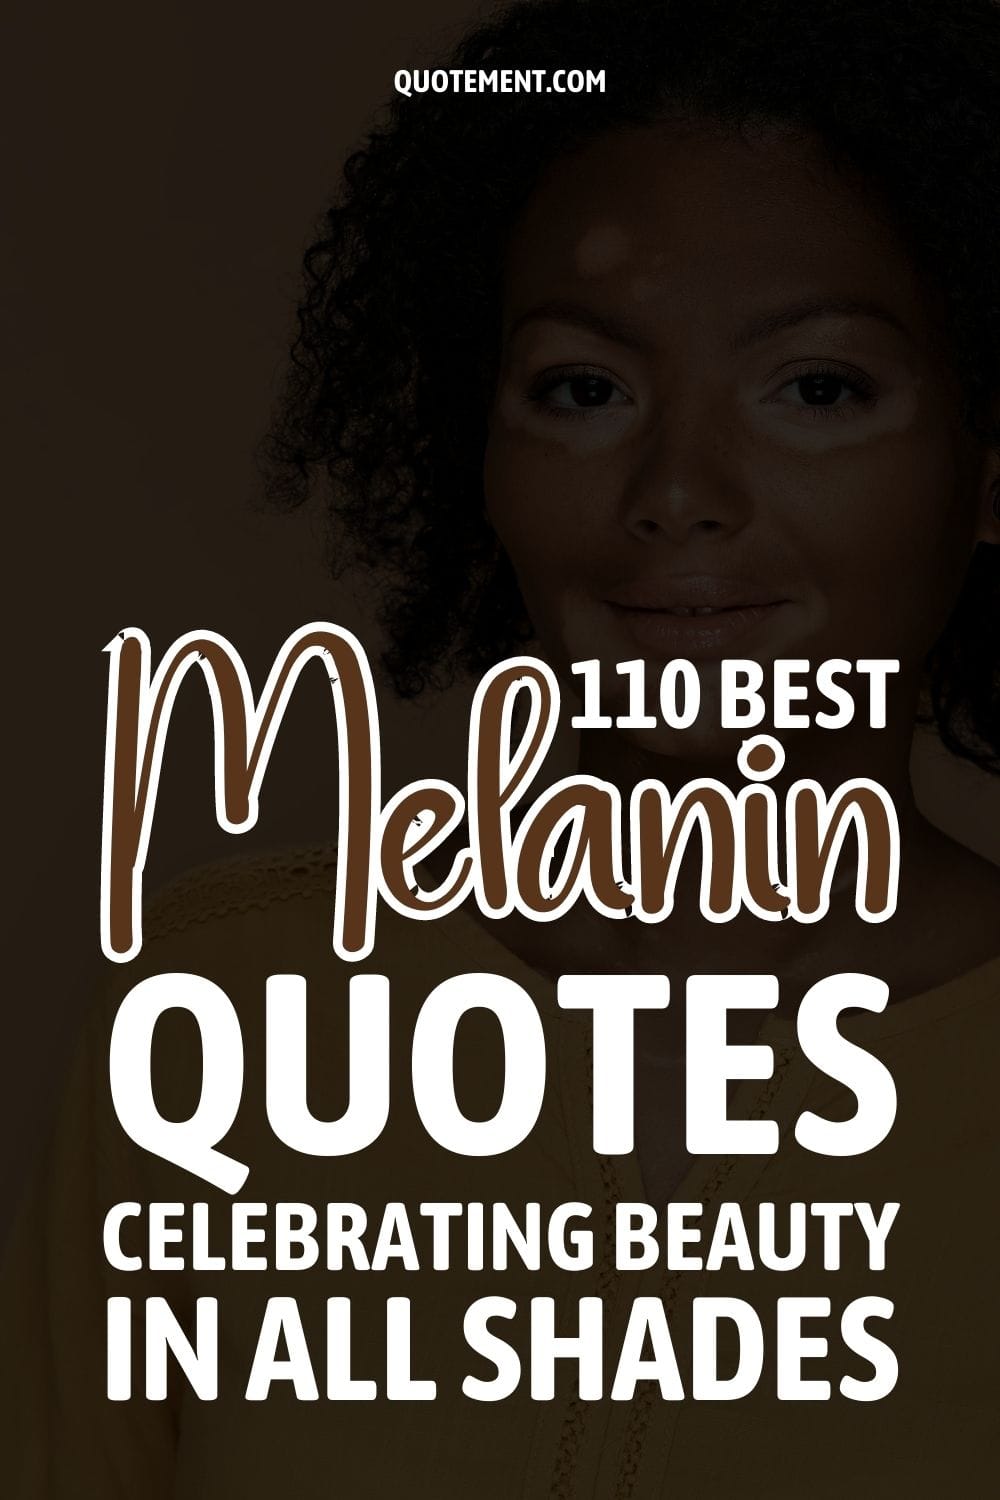 80 Best Melanin Quotes Celebrating Beauty In All Shades
